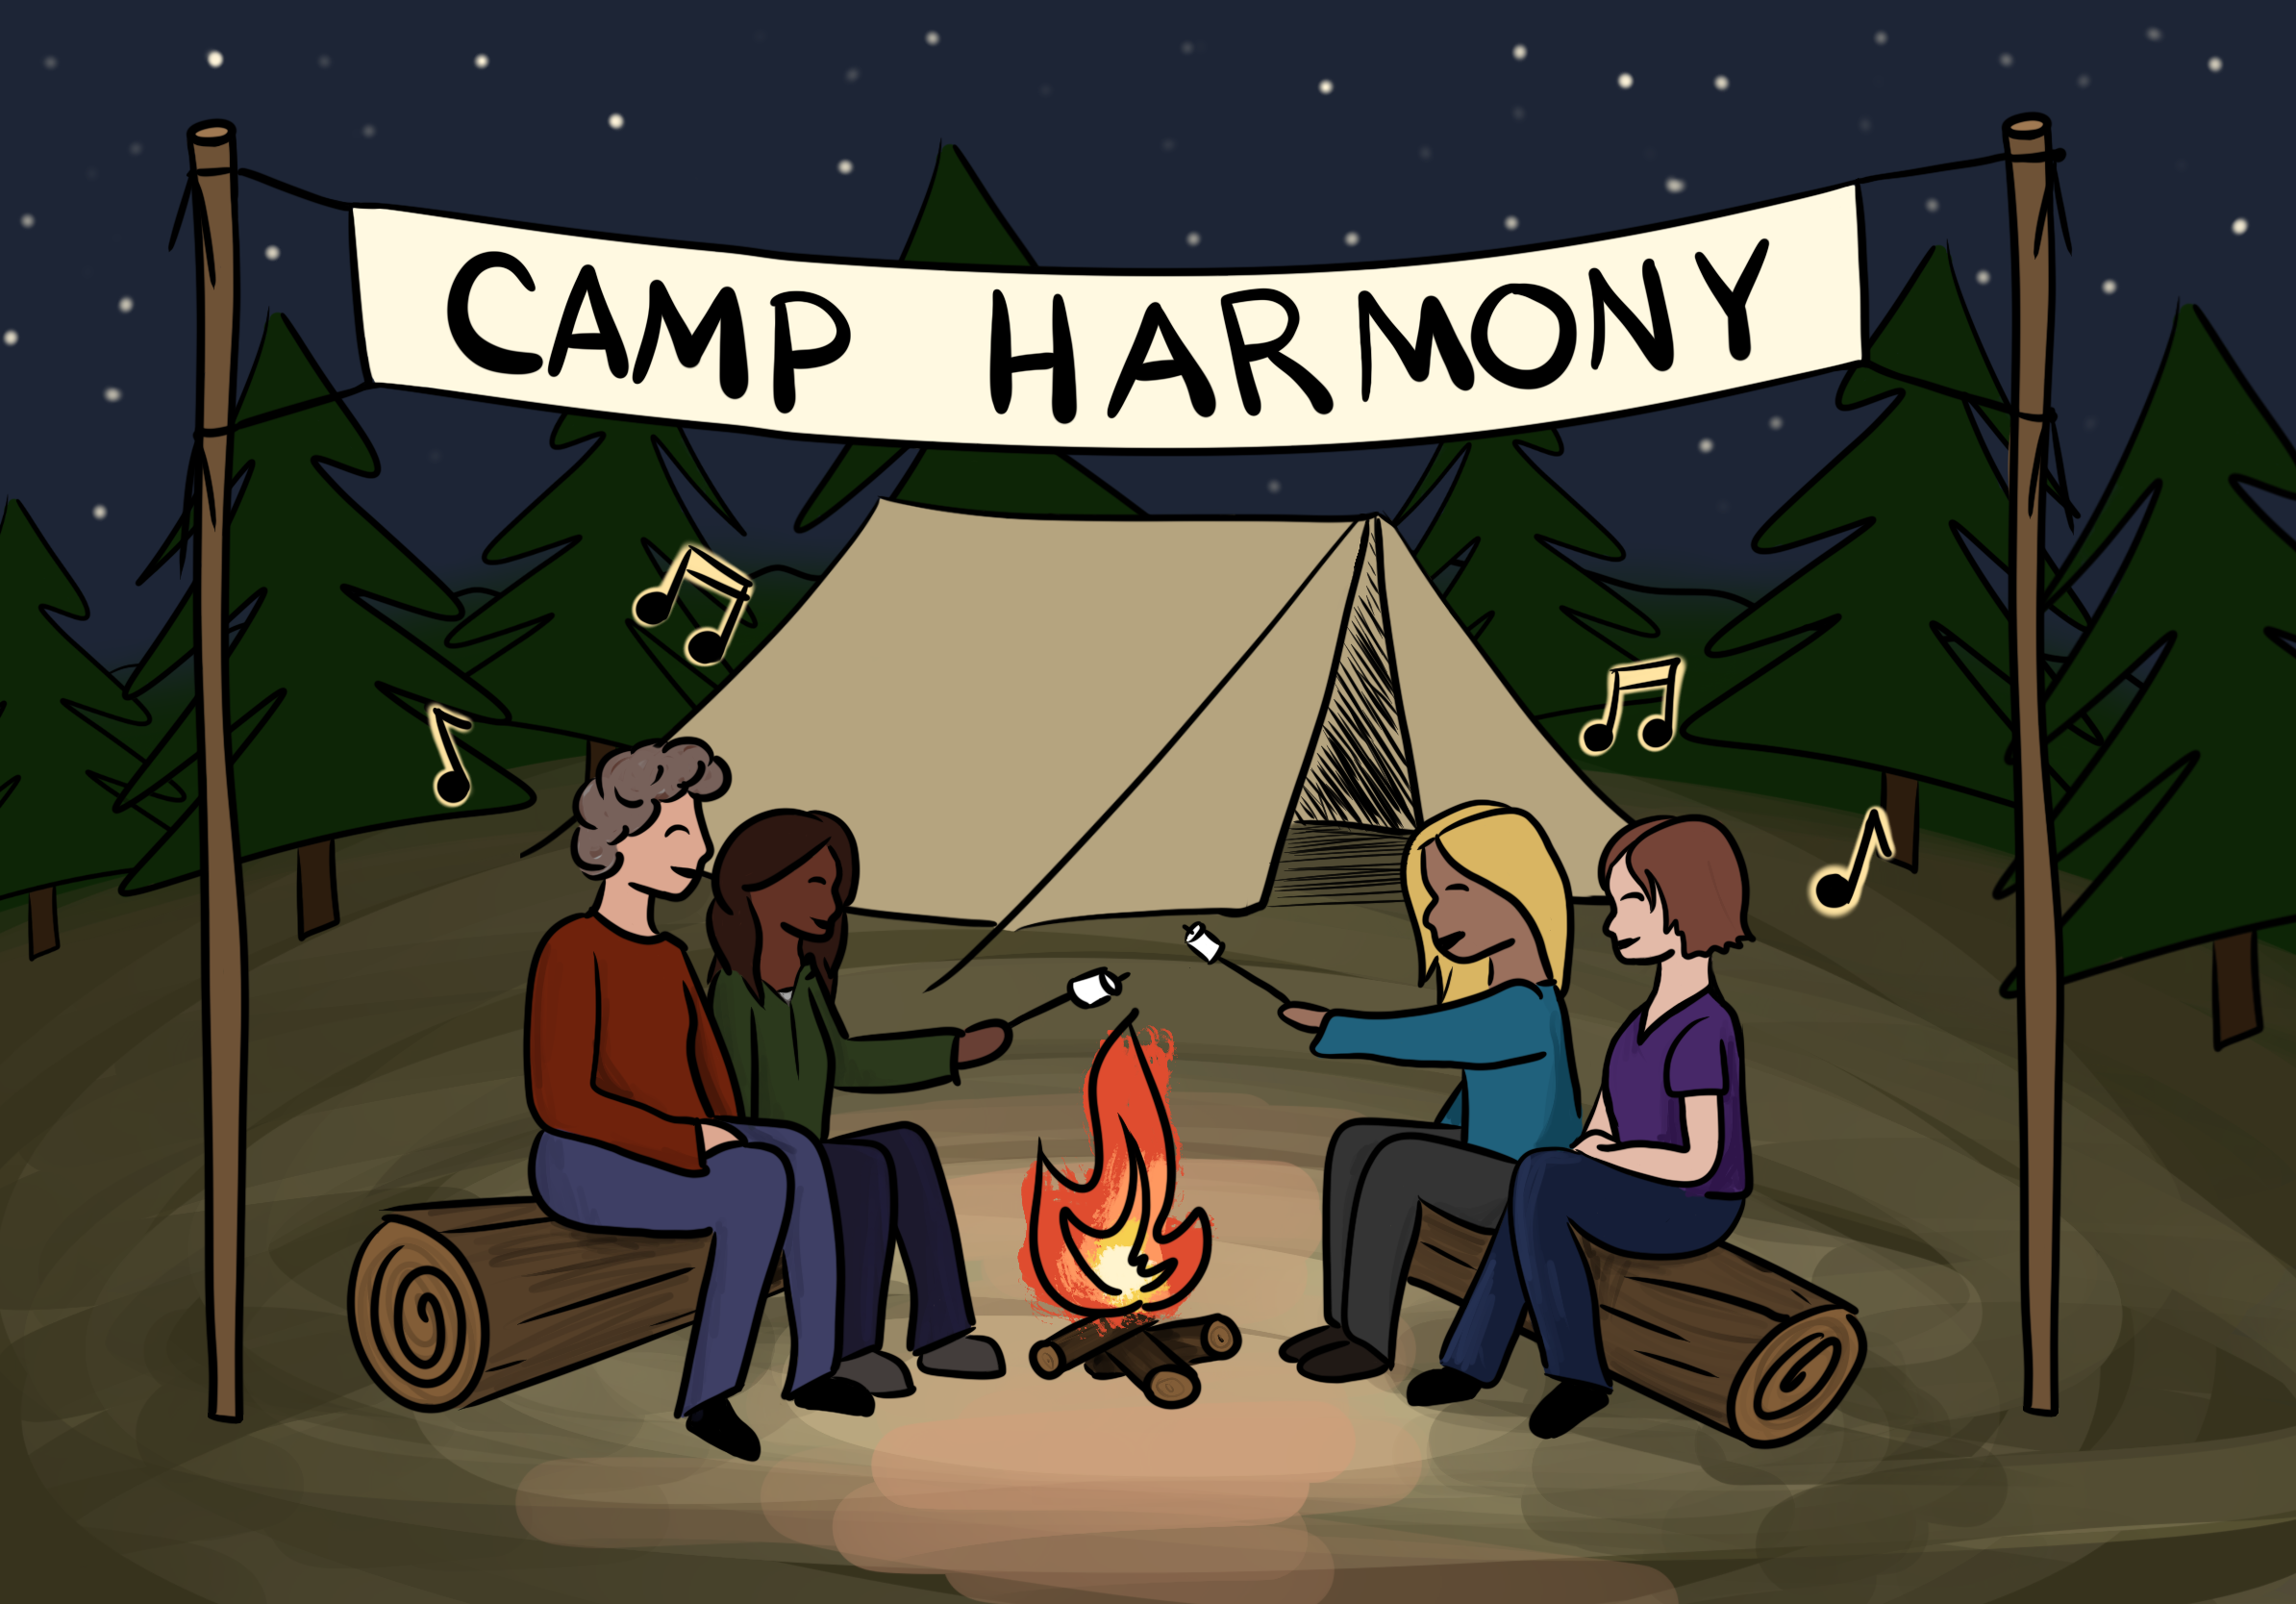 Sumer Guest Event - Camp Harmony!